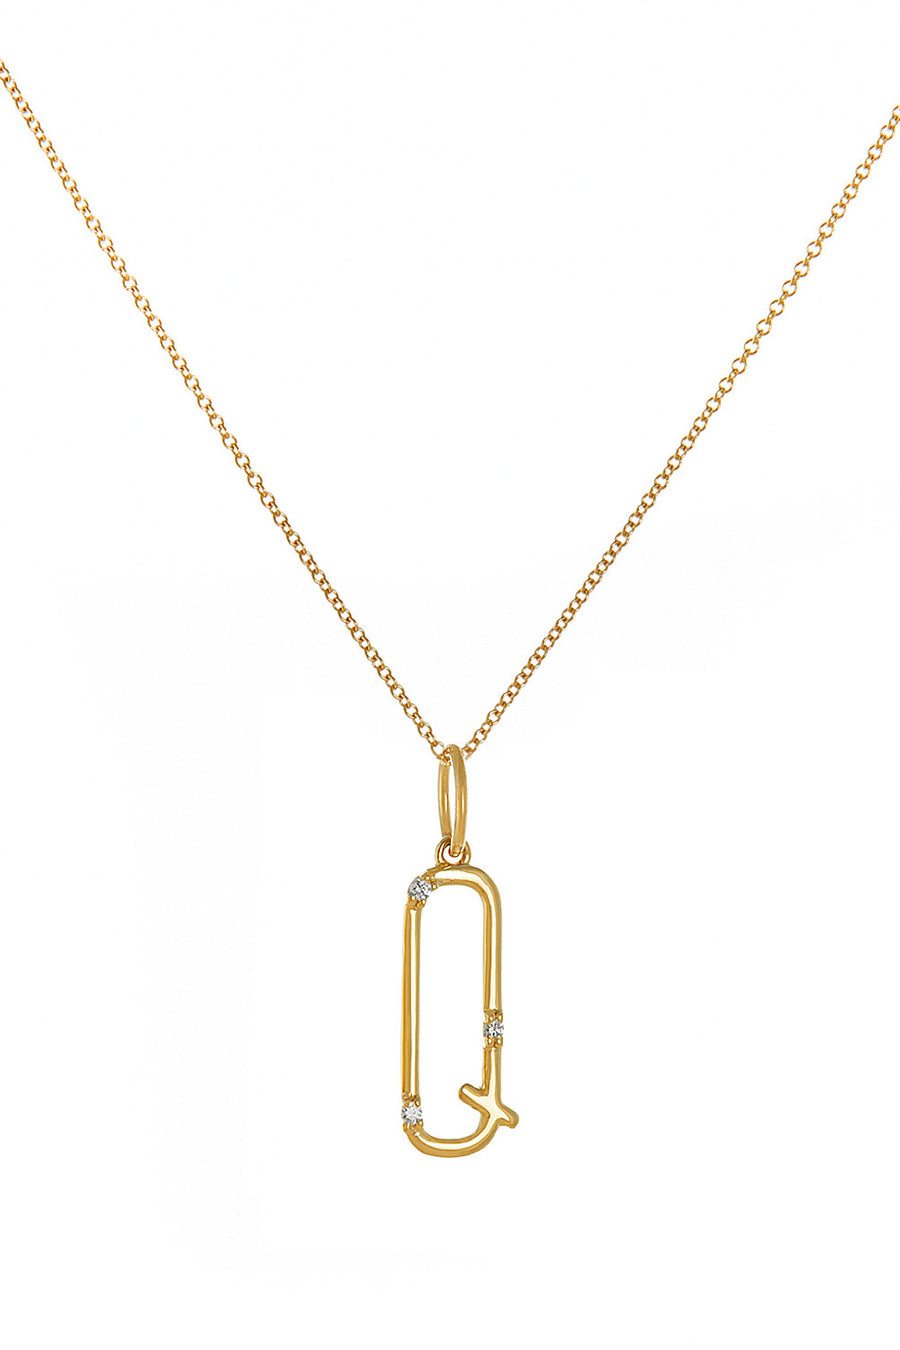 Diamond Character Charm in 18K Gold